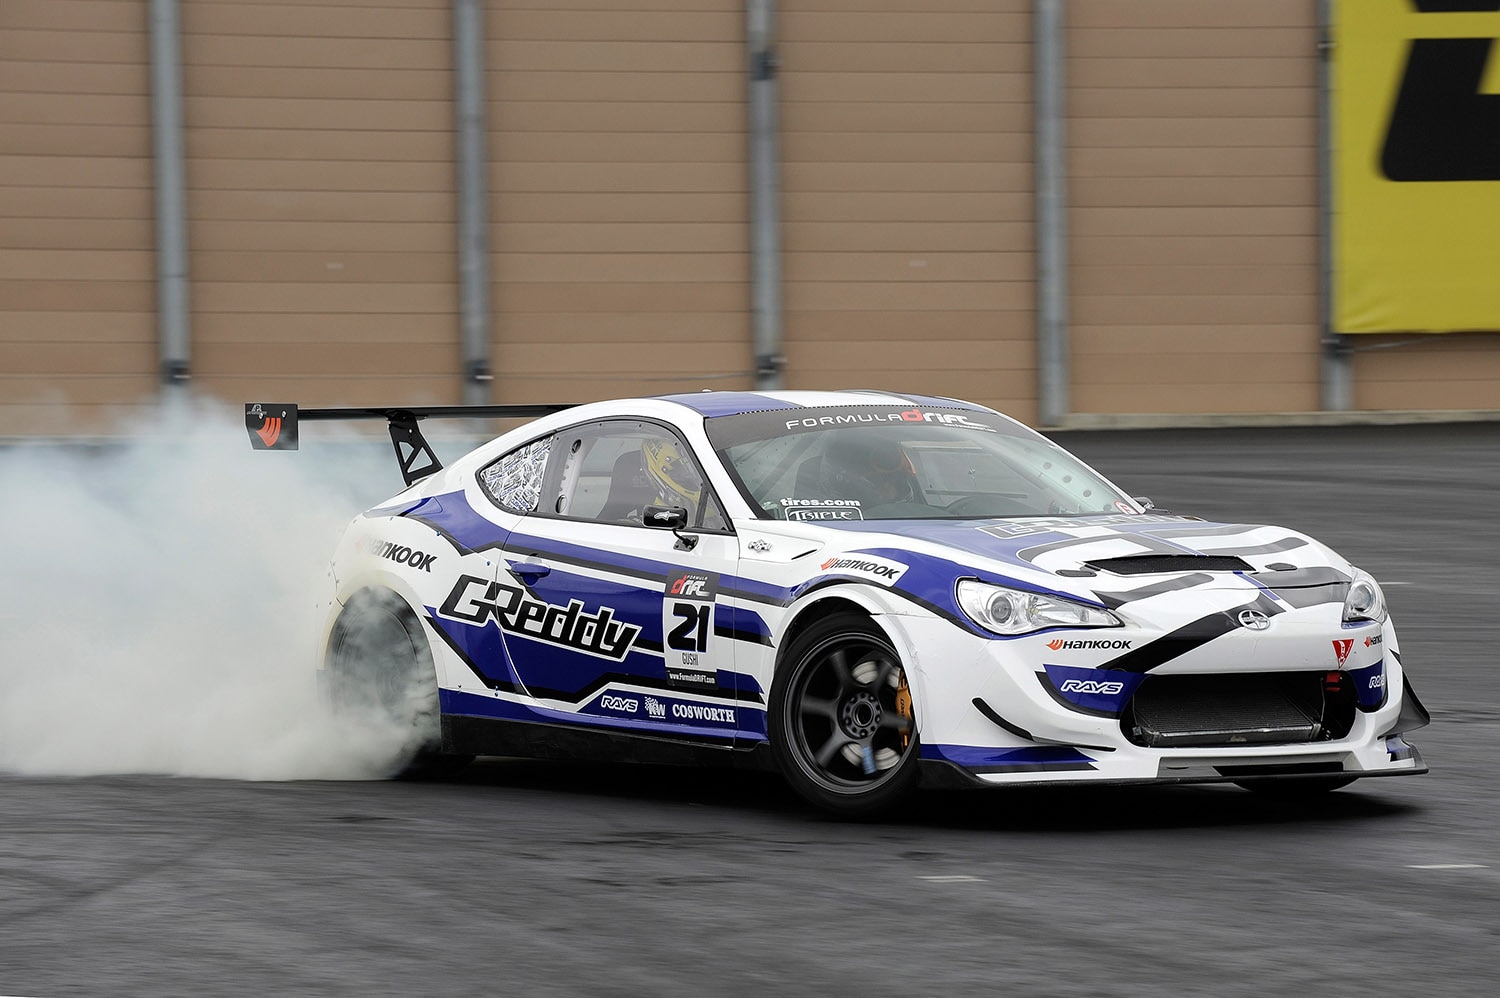 Scion FR-S in white and blue with white smoke behind it drifting around a track